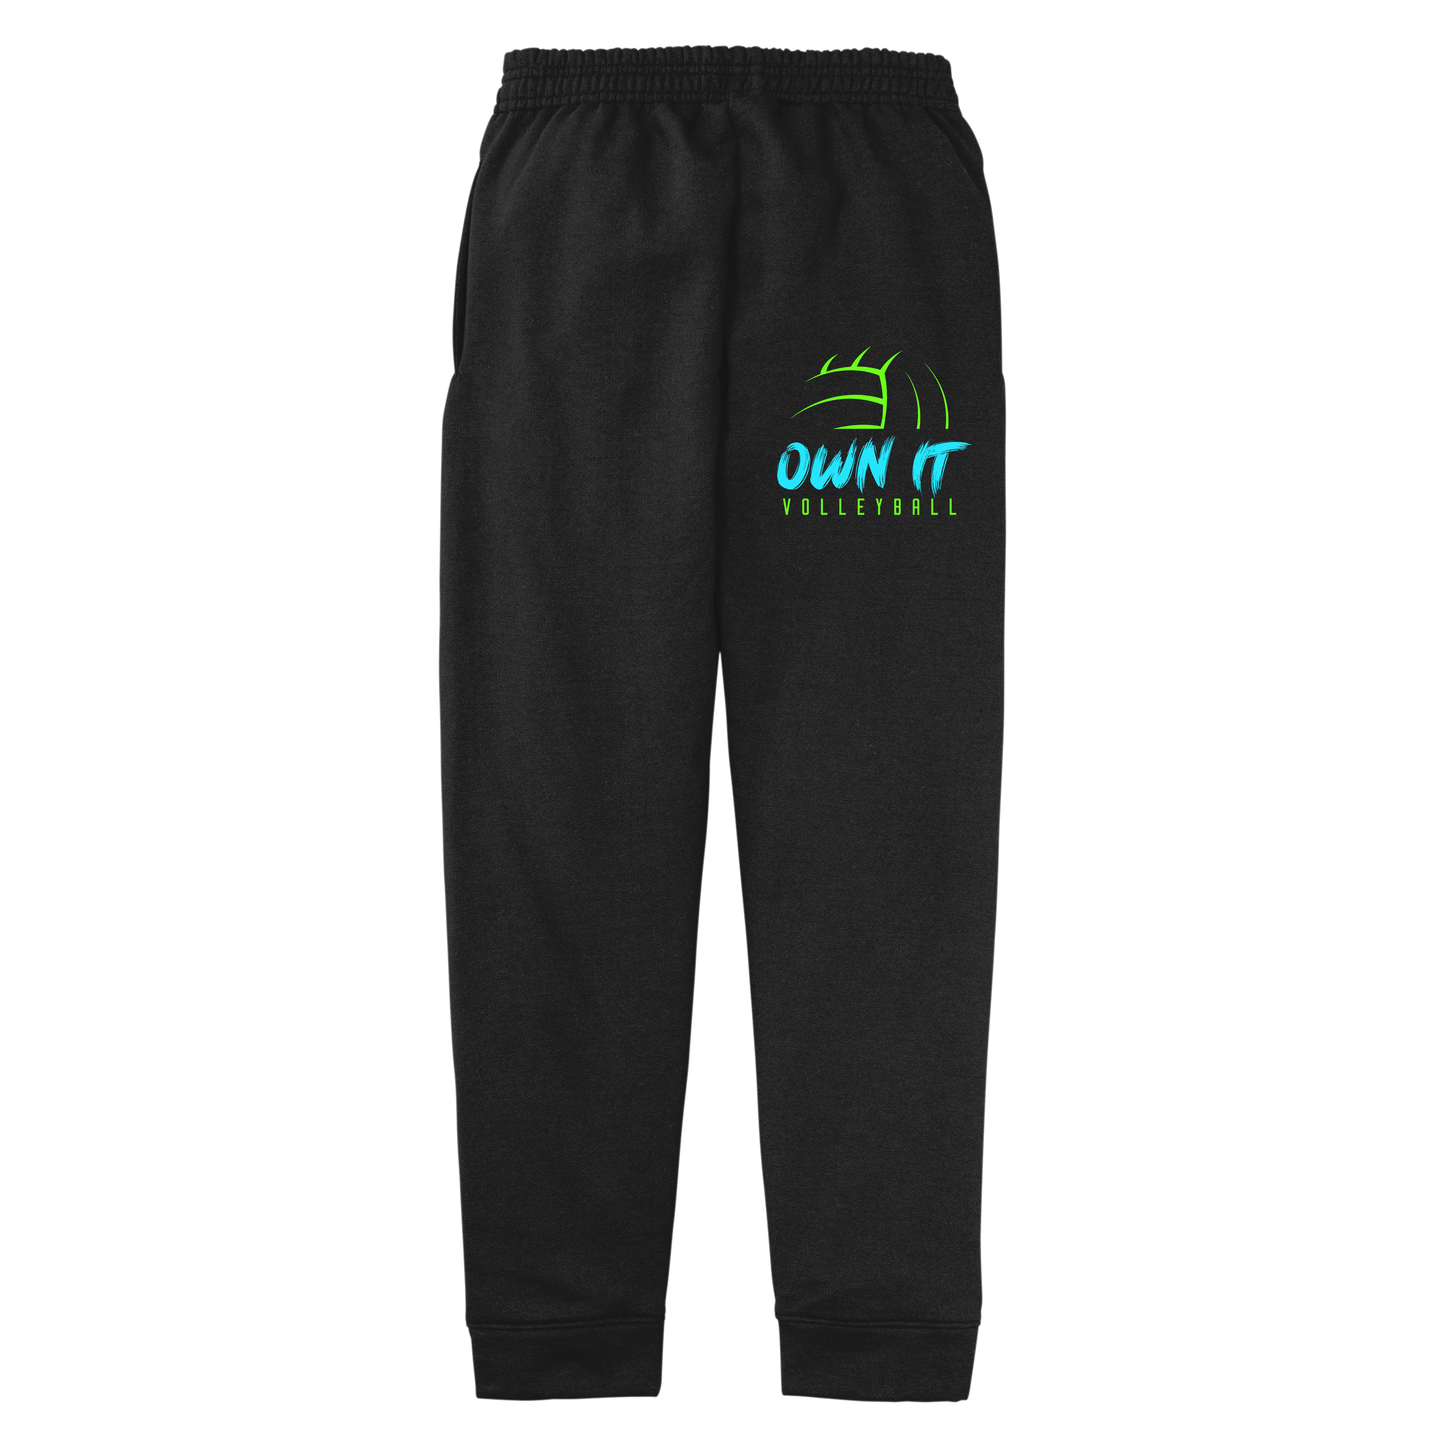 Own It Volleyball Club Joggers Youth and Adult